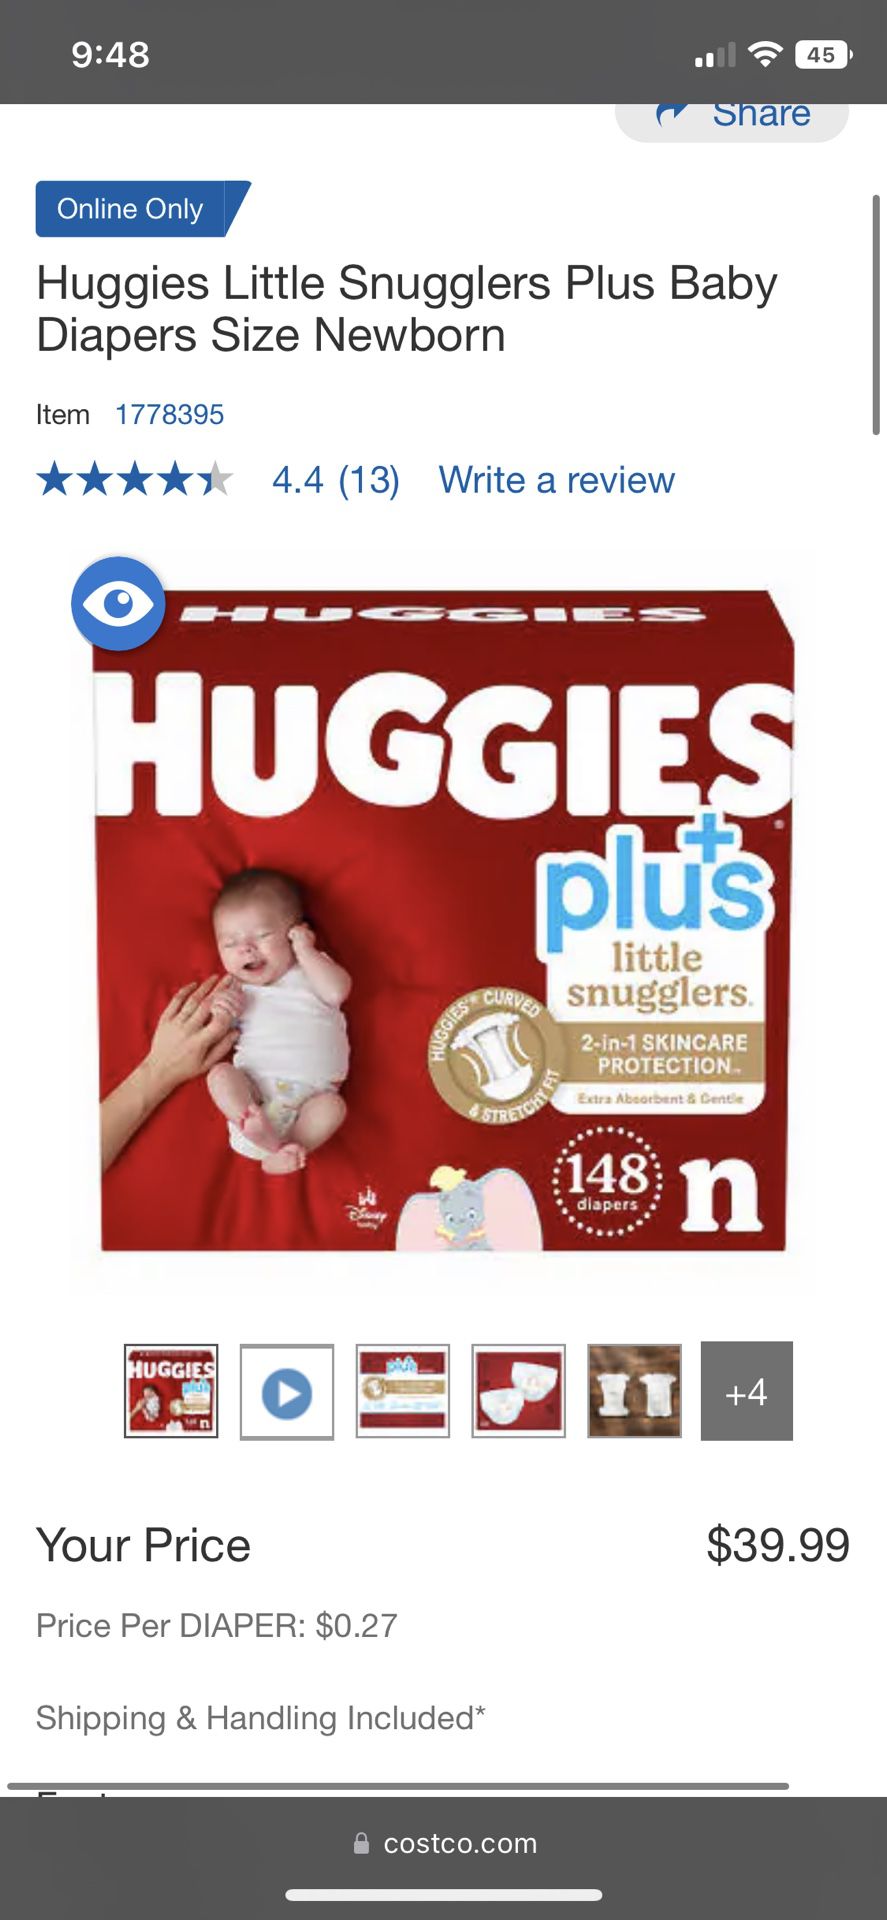 100 Diapers.